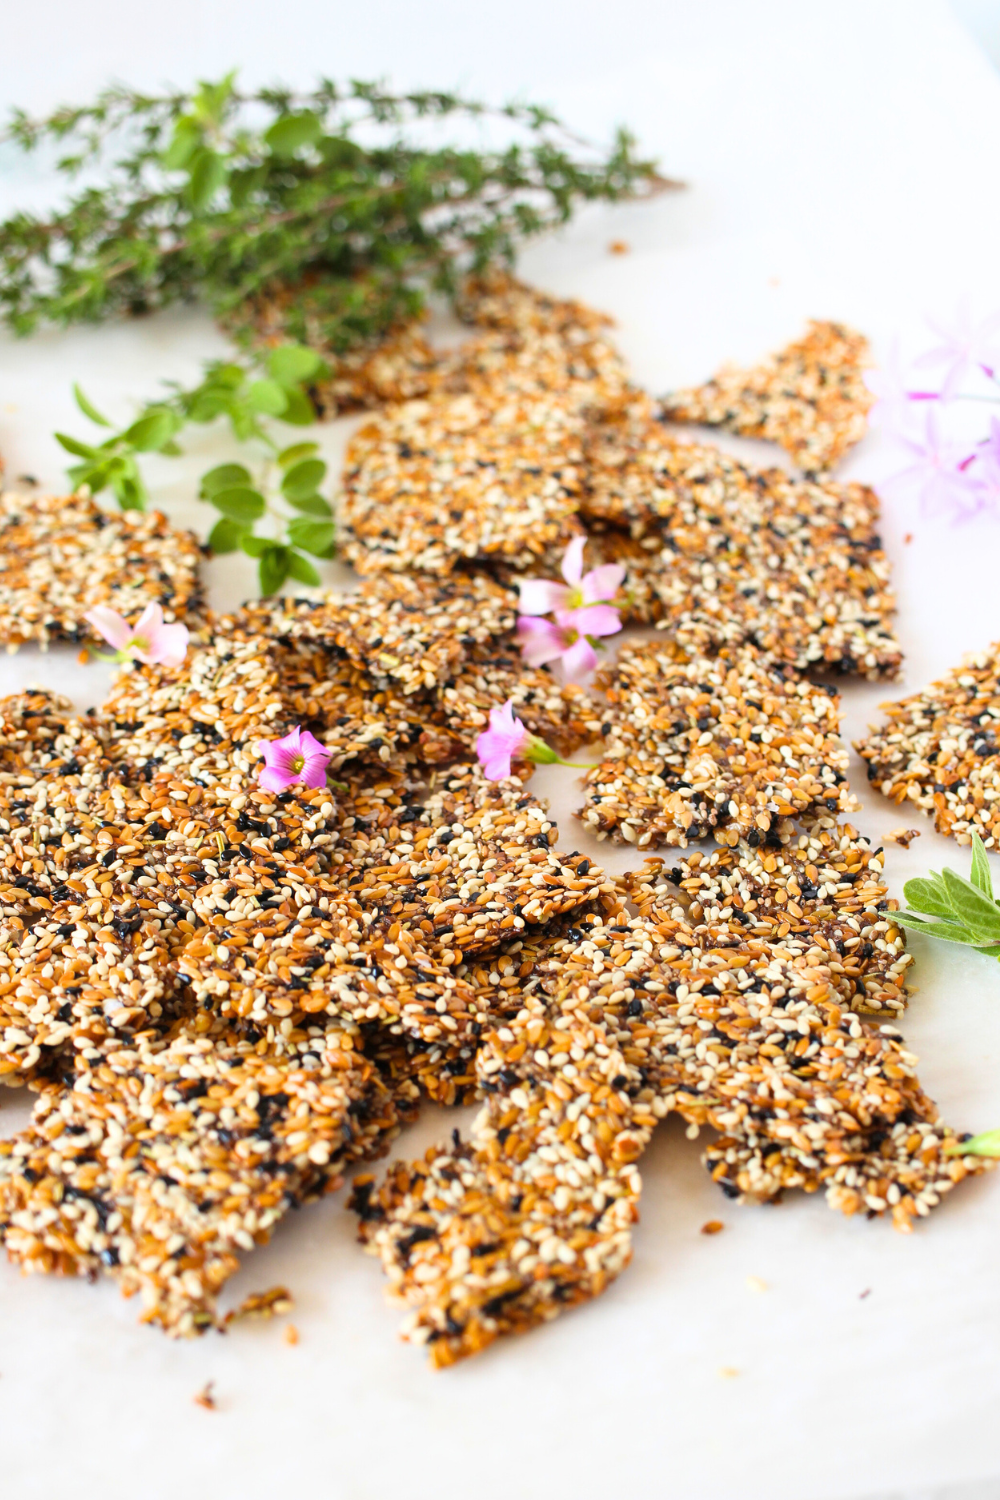 Angular vew of plant-based keto seed crackers broken into individual crackers with herbs and chive flowers